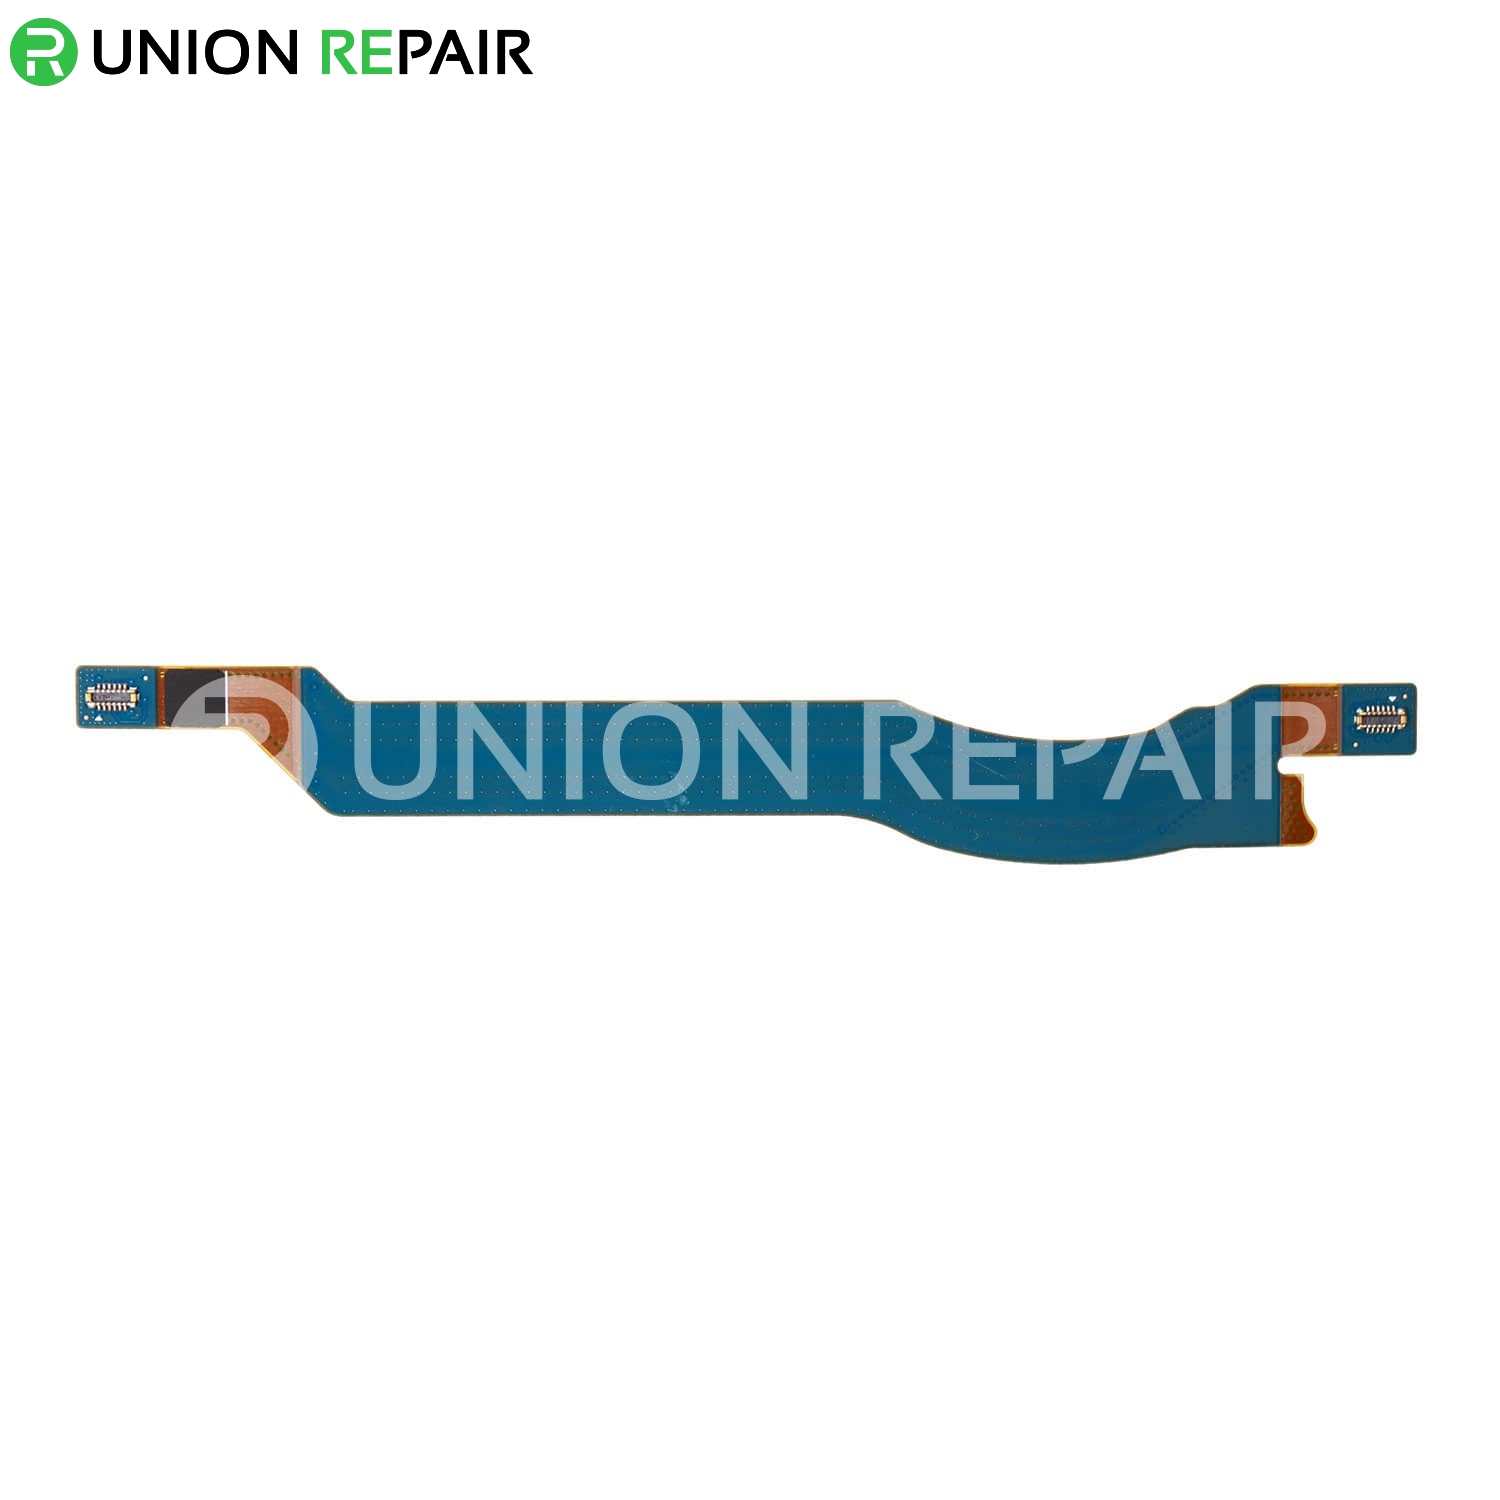 Replacement for Samsung Galaxy Note 20 Ultra N986B LCD Display Flex Cable